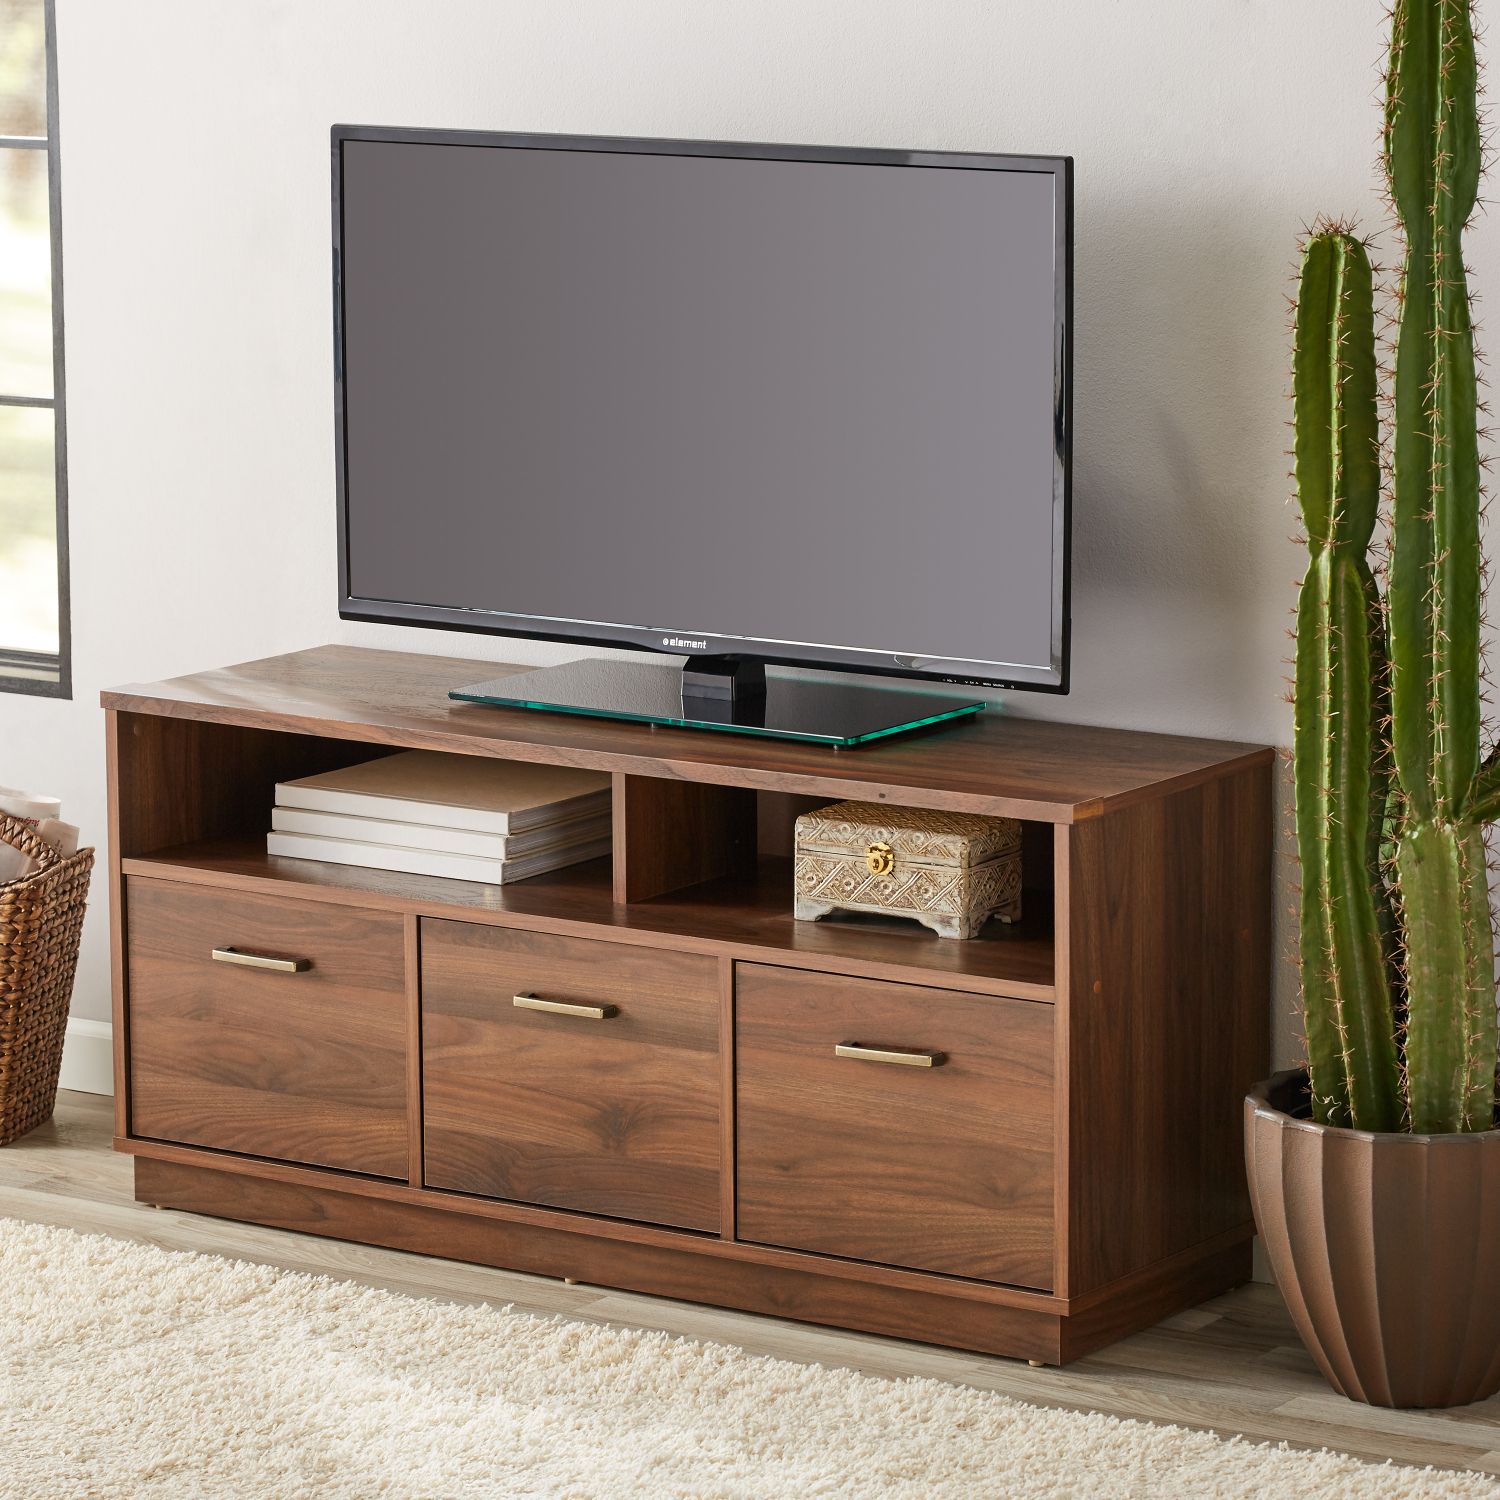 Canyon Walnut 3 Door Tv Stand Console For Tvs Up To 50 Wooden Cabinet Inside Walnut Wood Storage Trunk Console Tables (Gallery 19 of 20)